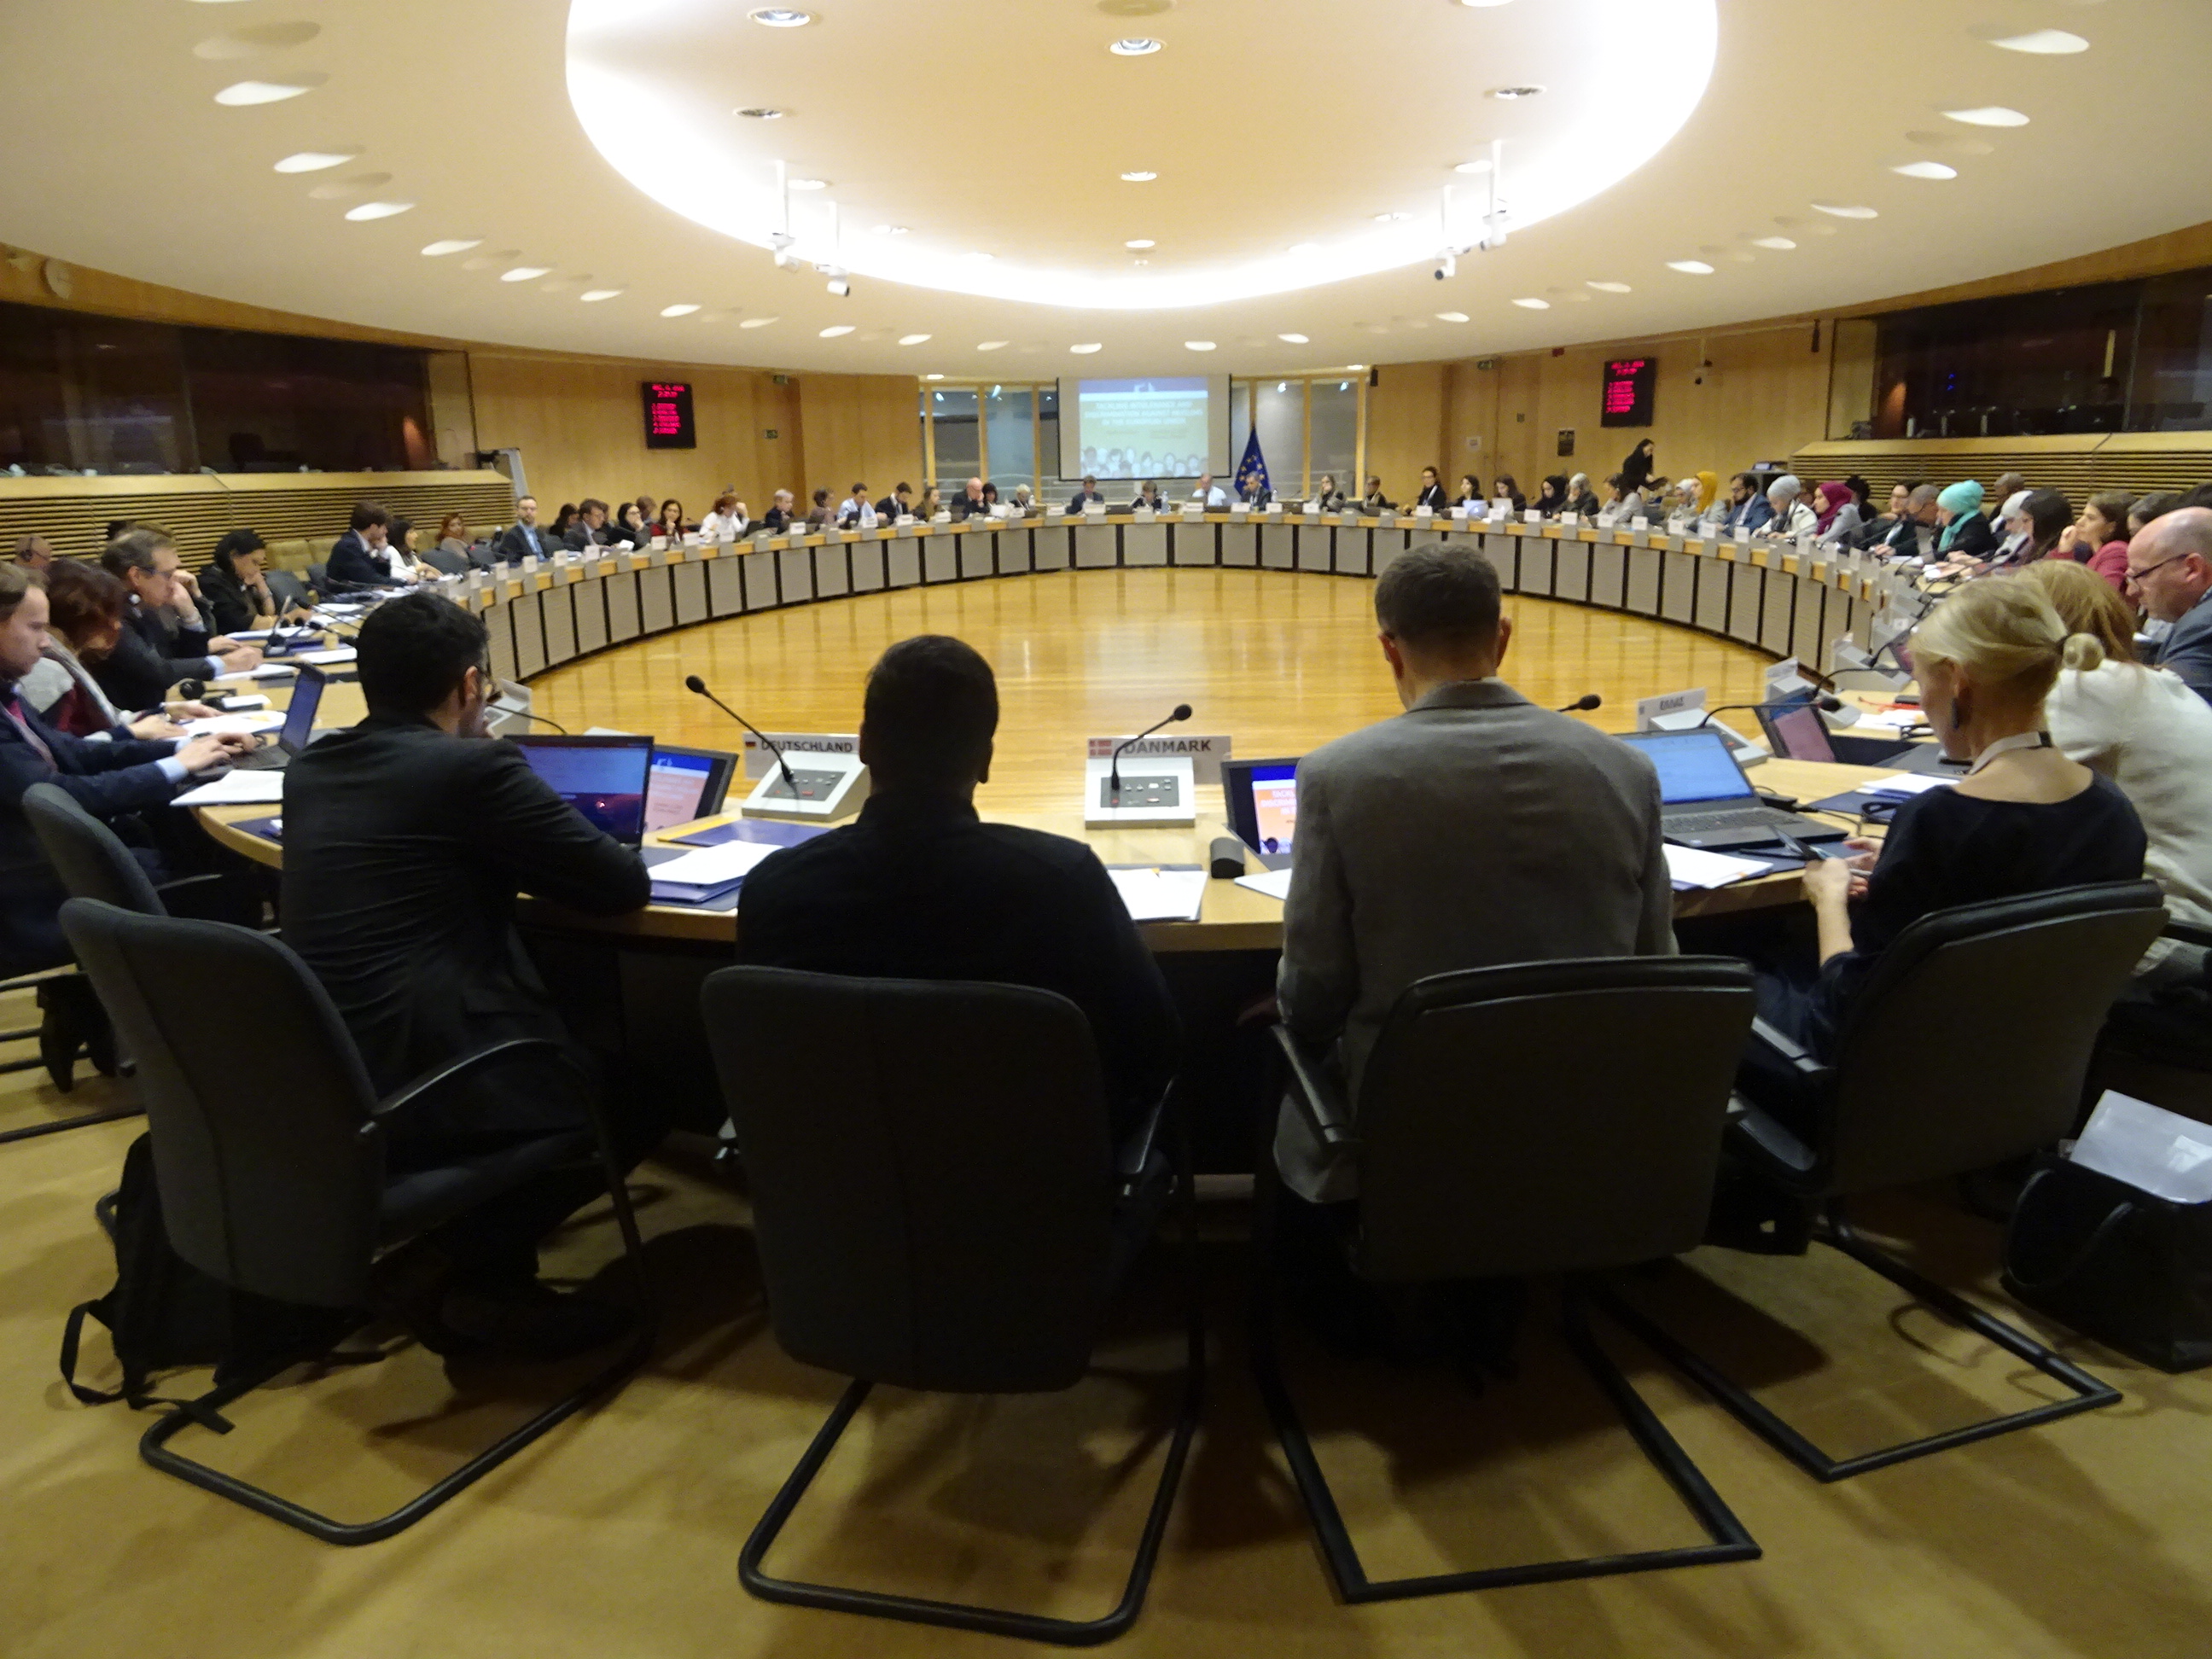 Brussels conf tackles anti-Muslim hatred in Europe